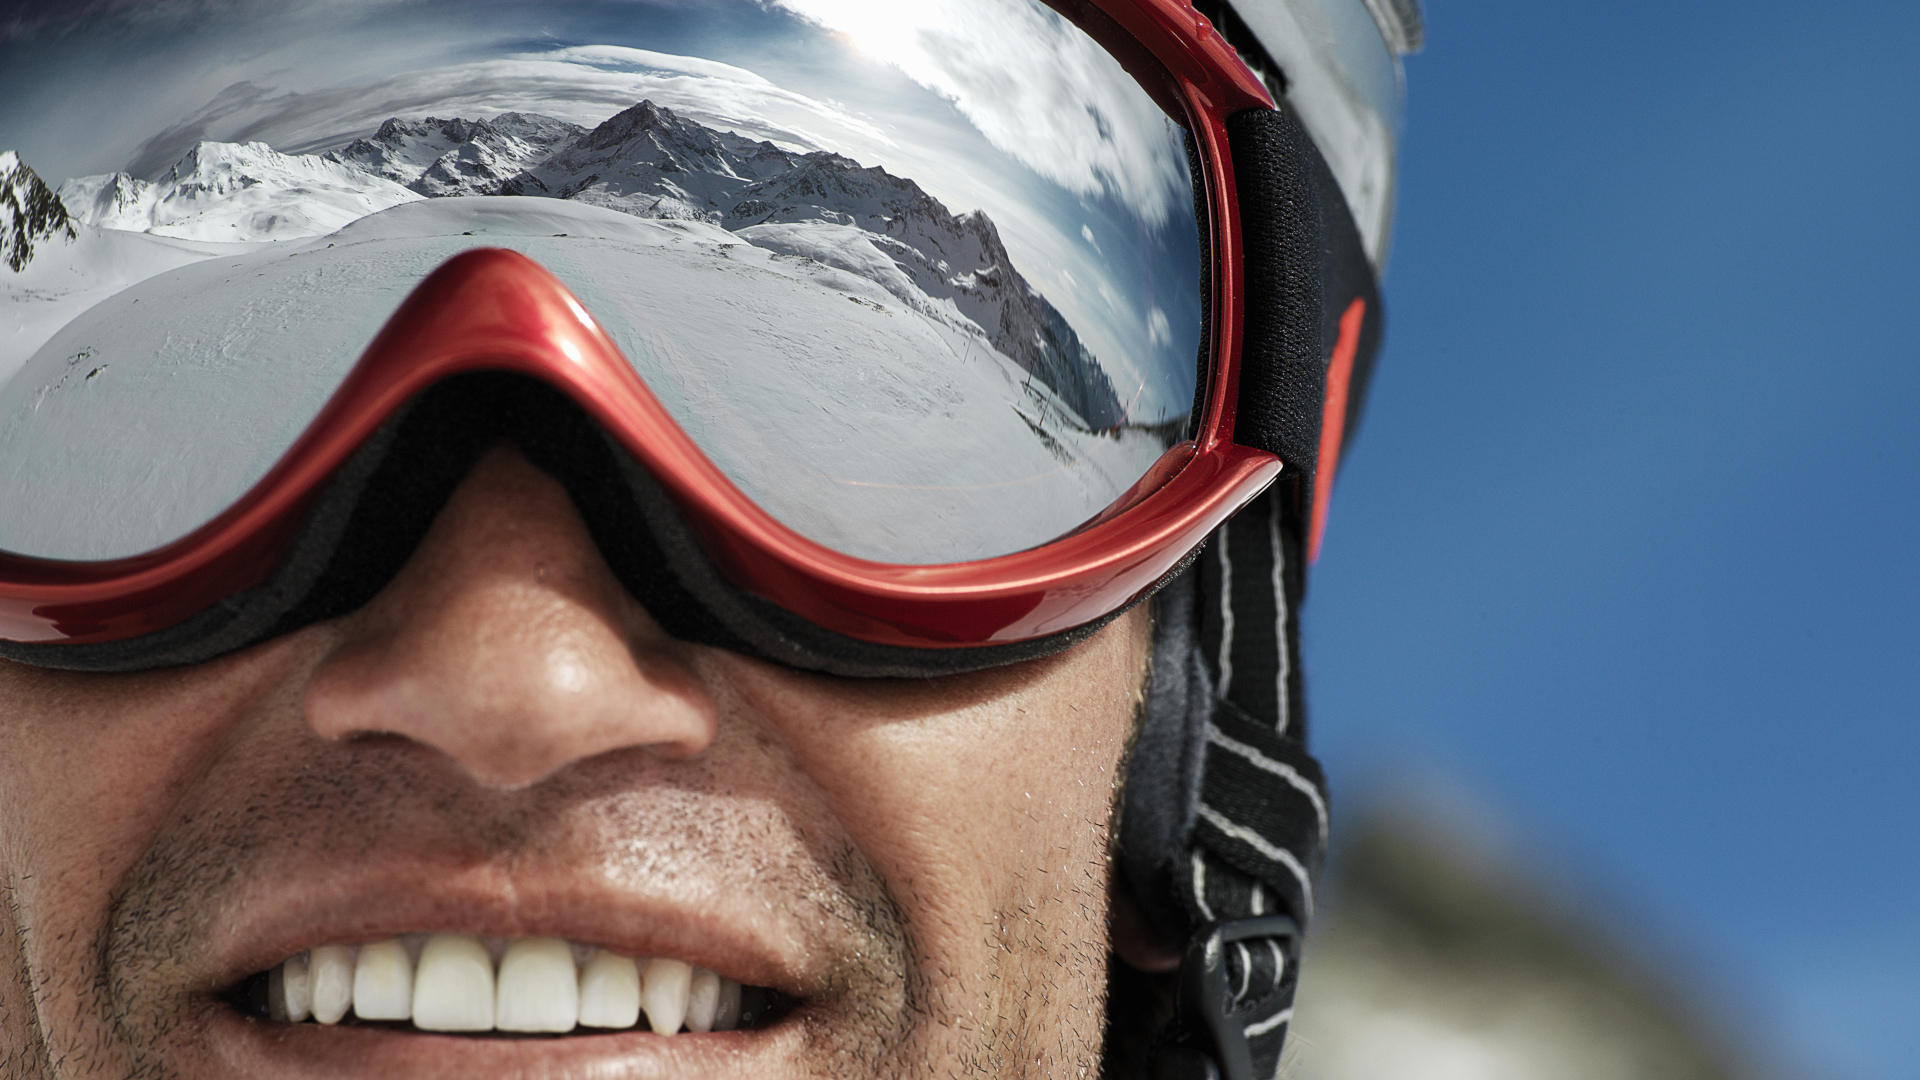 Details about   Ski Goggles Anti-fog UV Protection Outdoor Winter Sports 